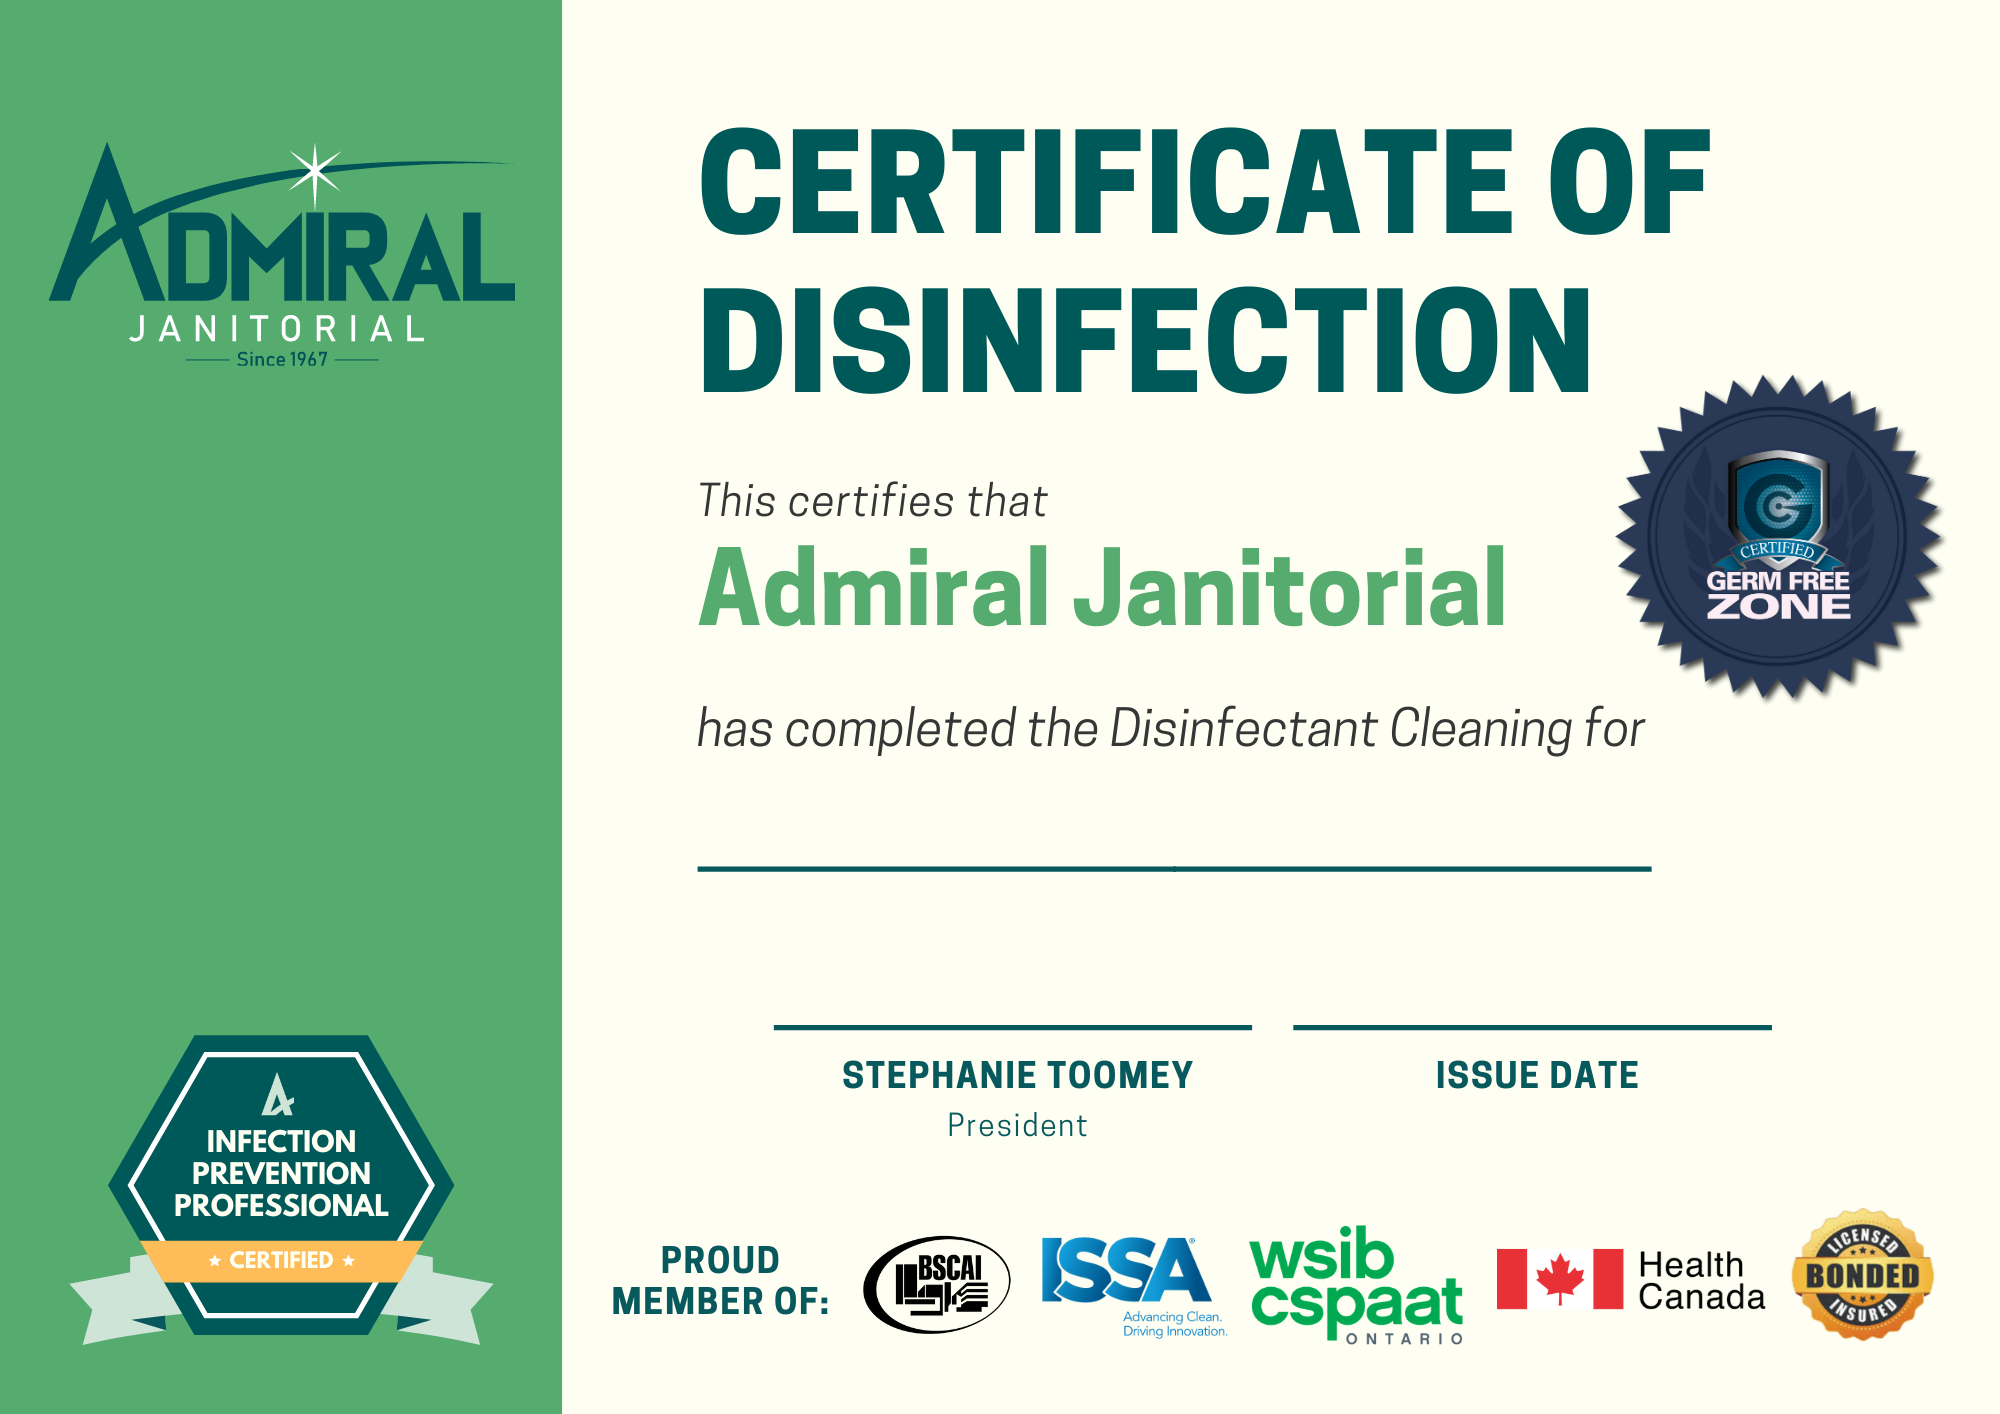 Admiral Janitorial Certificate of Disinfection